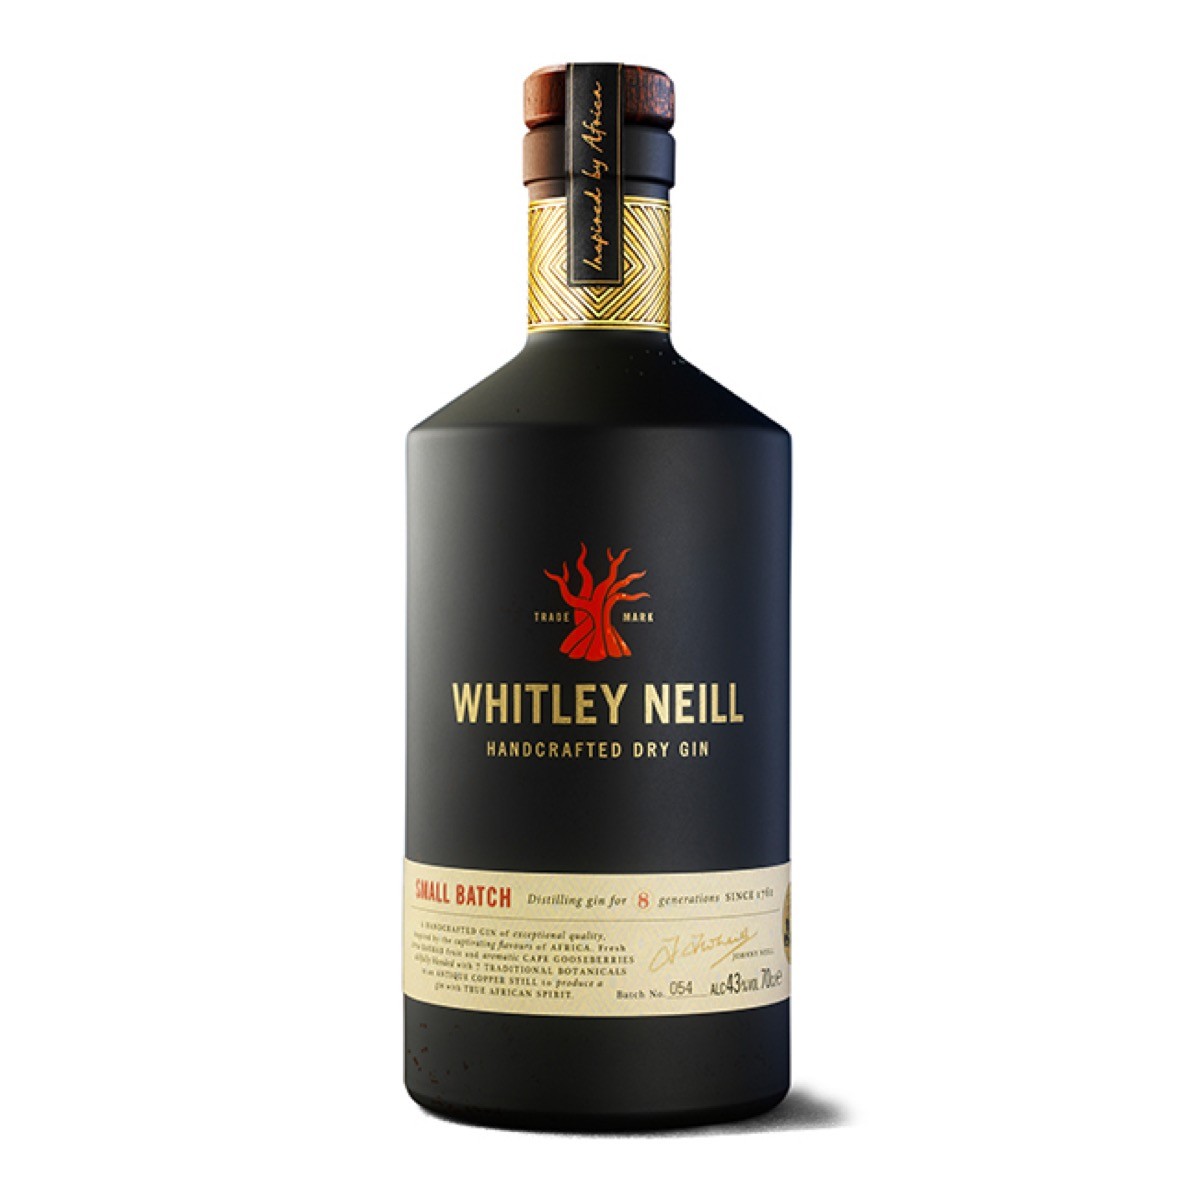 Whitley Neill Handcrafted Dry Gin 700 ml